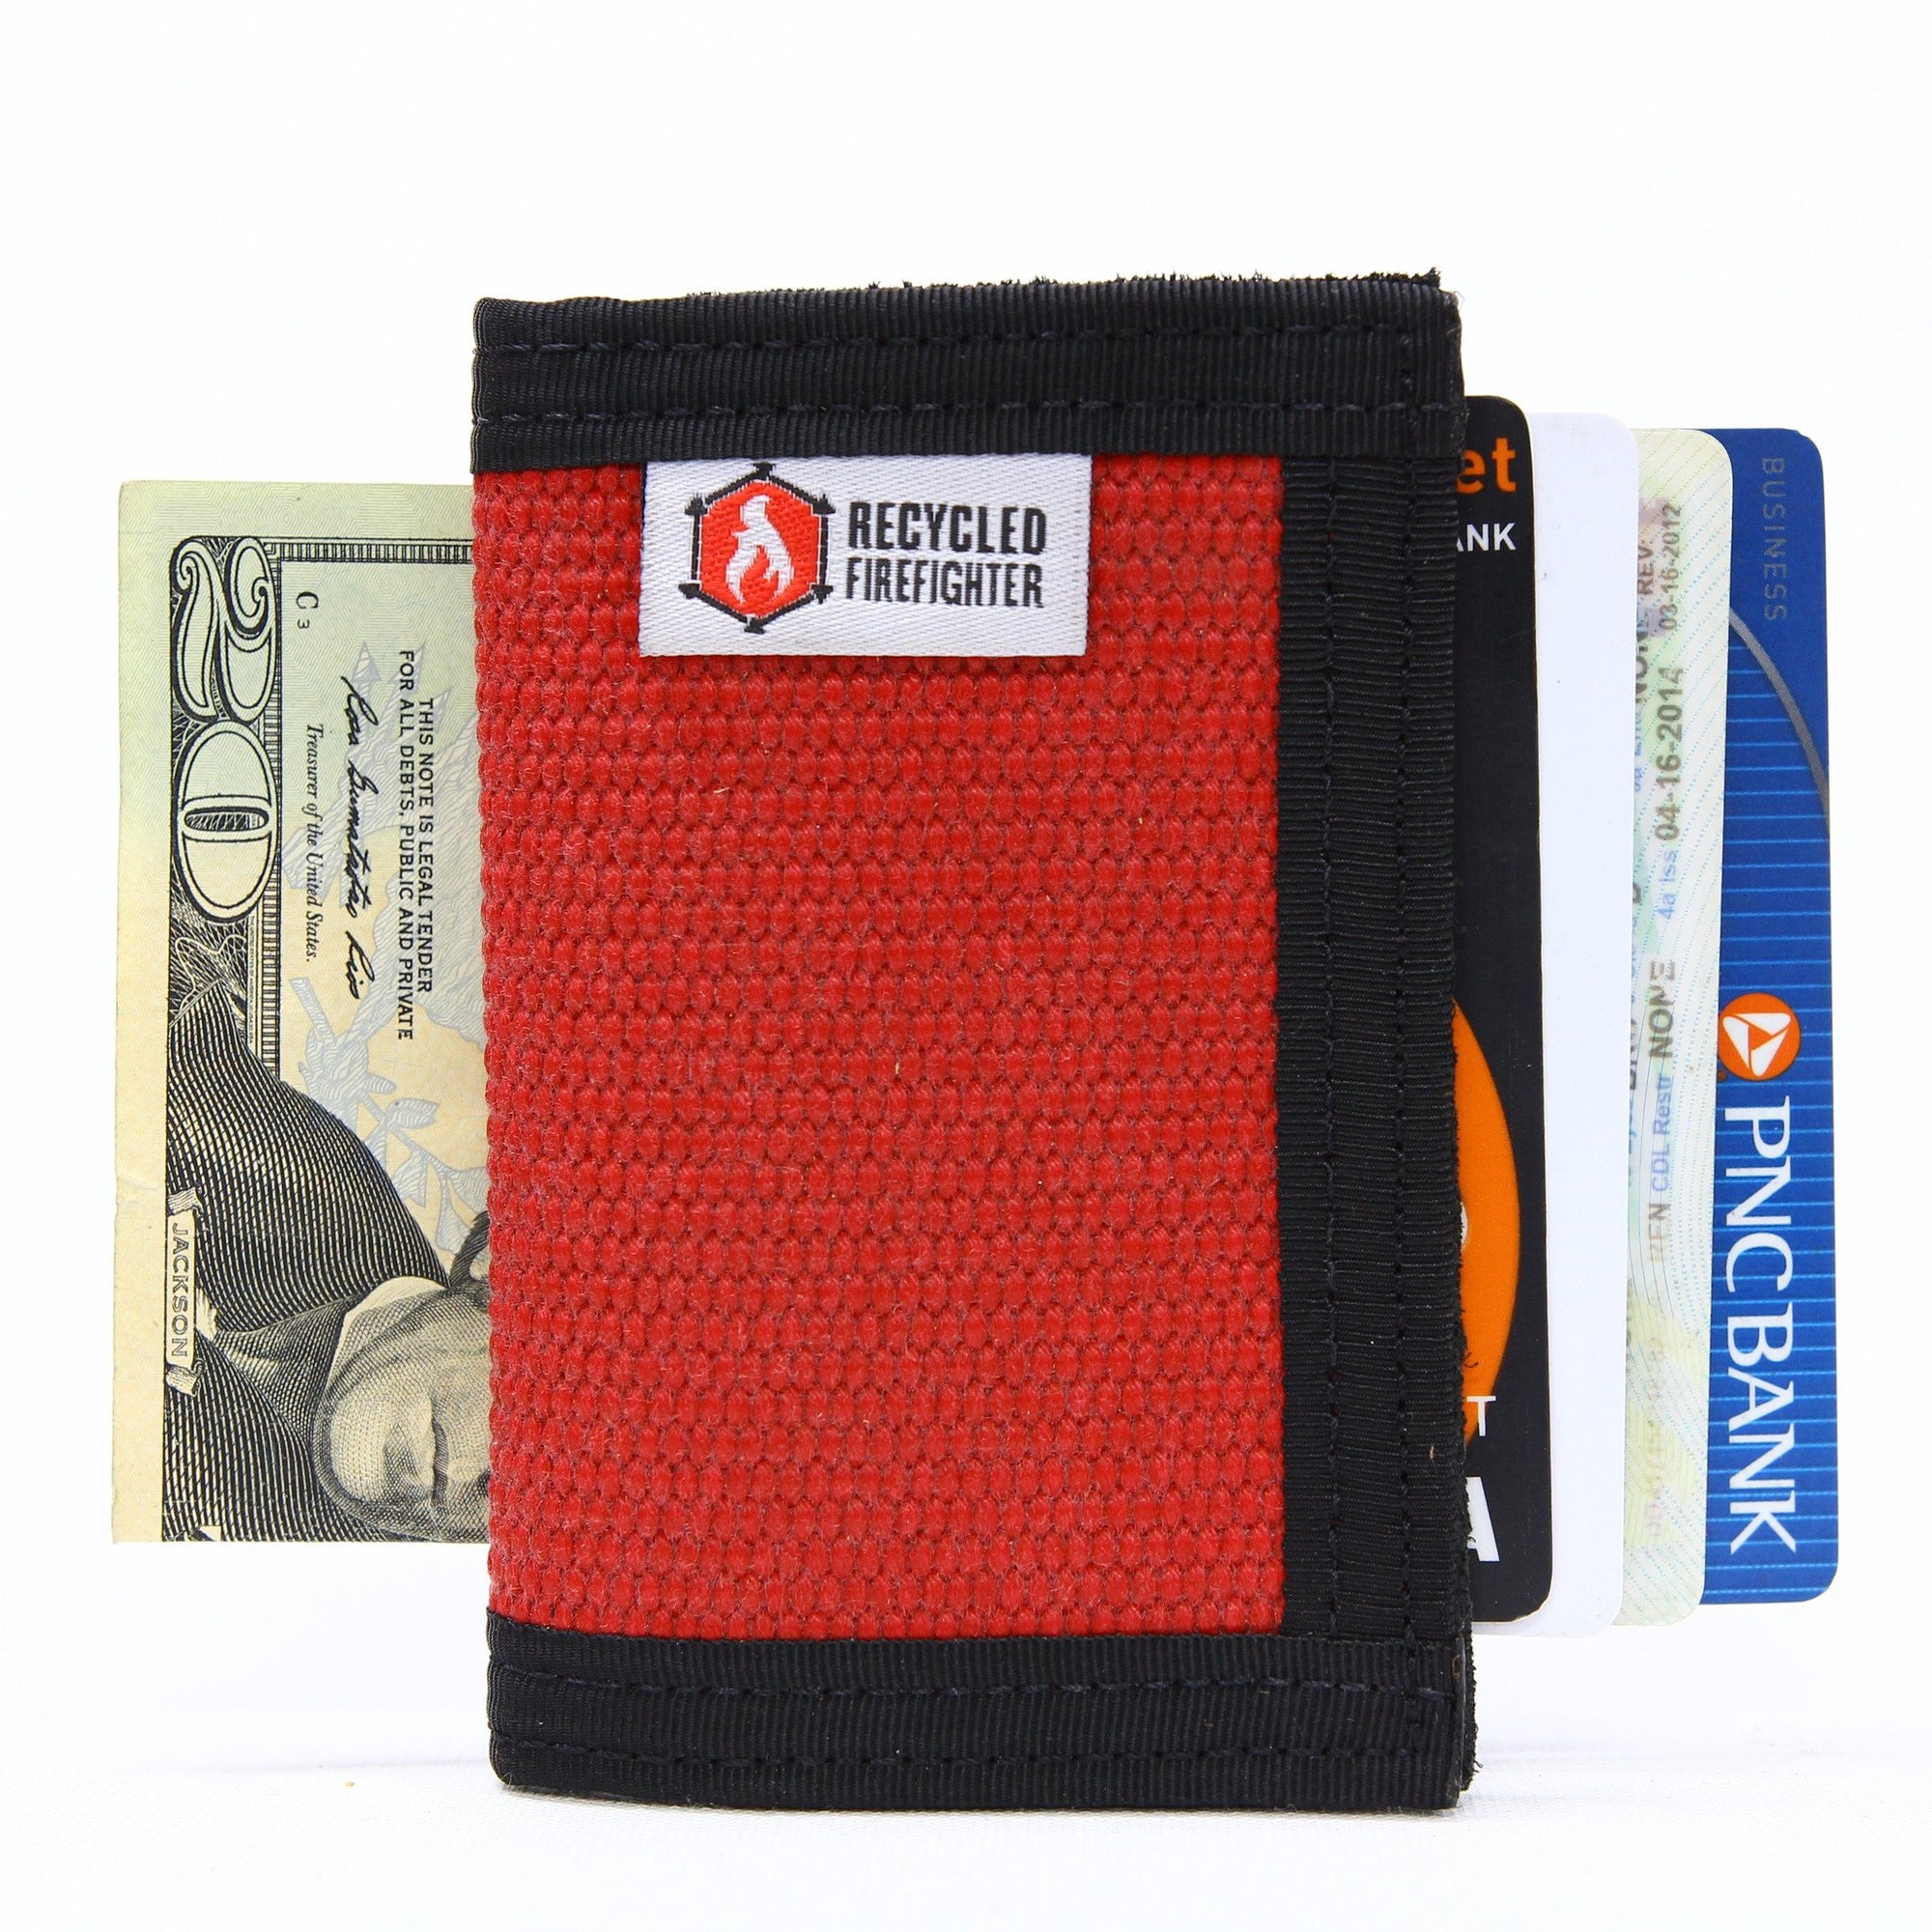 5 Awesome EDC Items for less than $25! - Recycled Firefighter